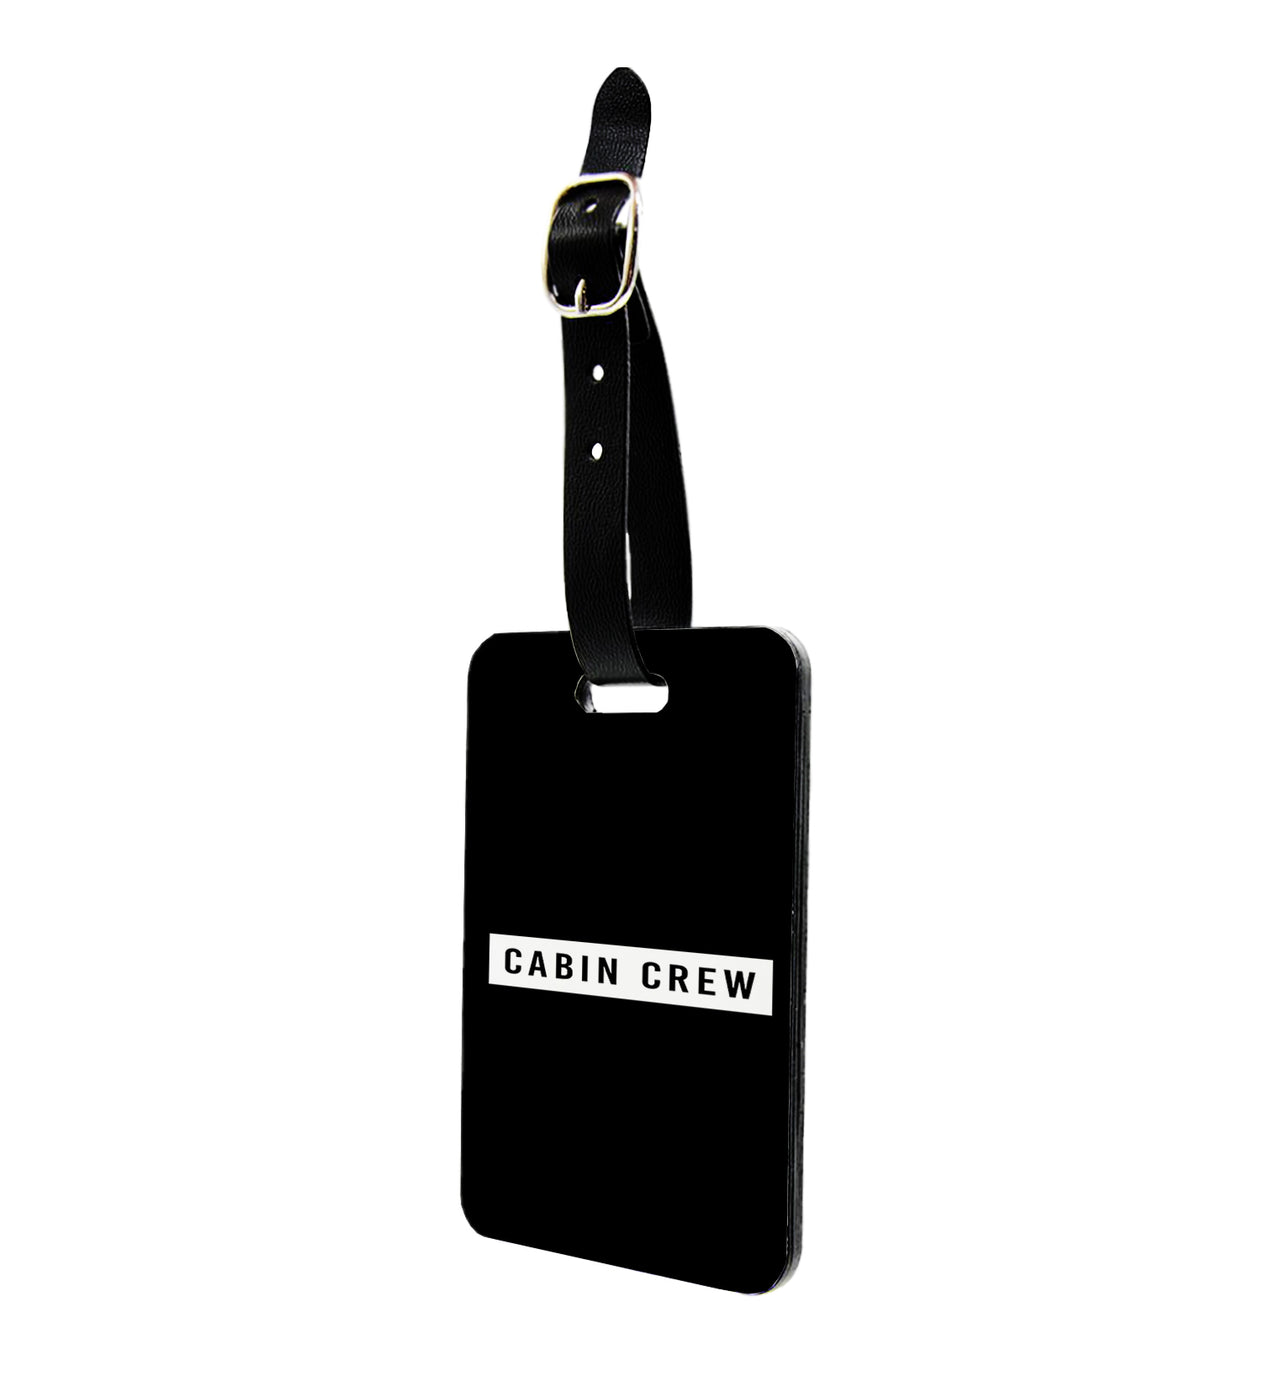 Cabin Crew Text Designed Luggage Tag